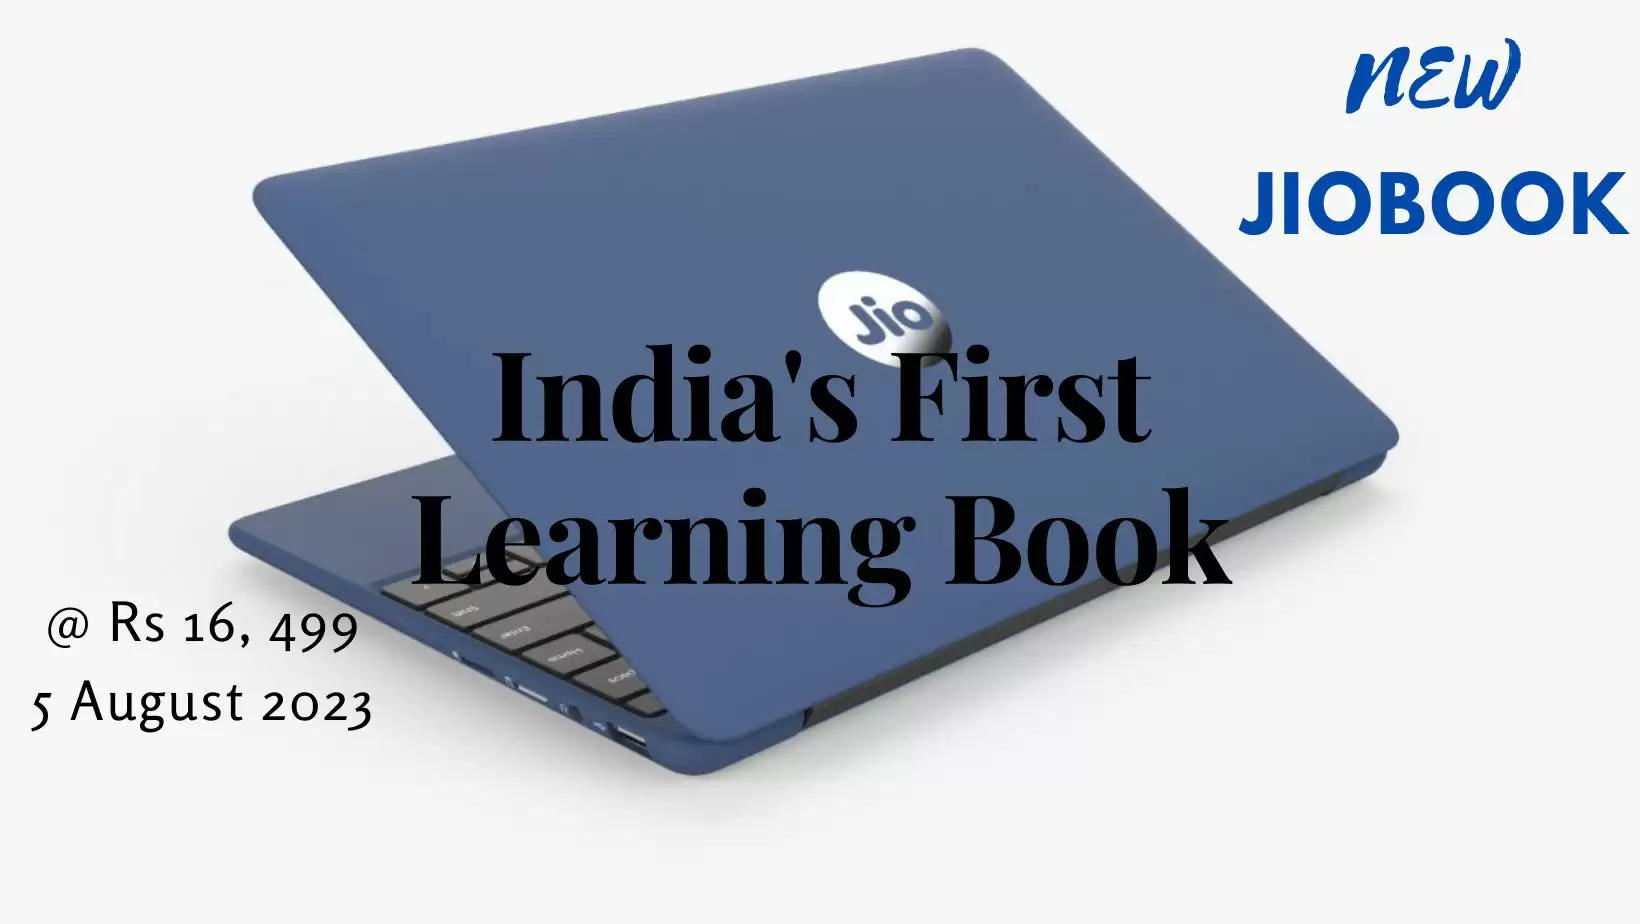 New JioBook Launched Price of JioBook is Rs 16499 Coding also possible